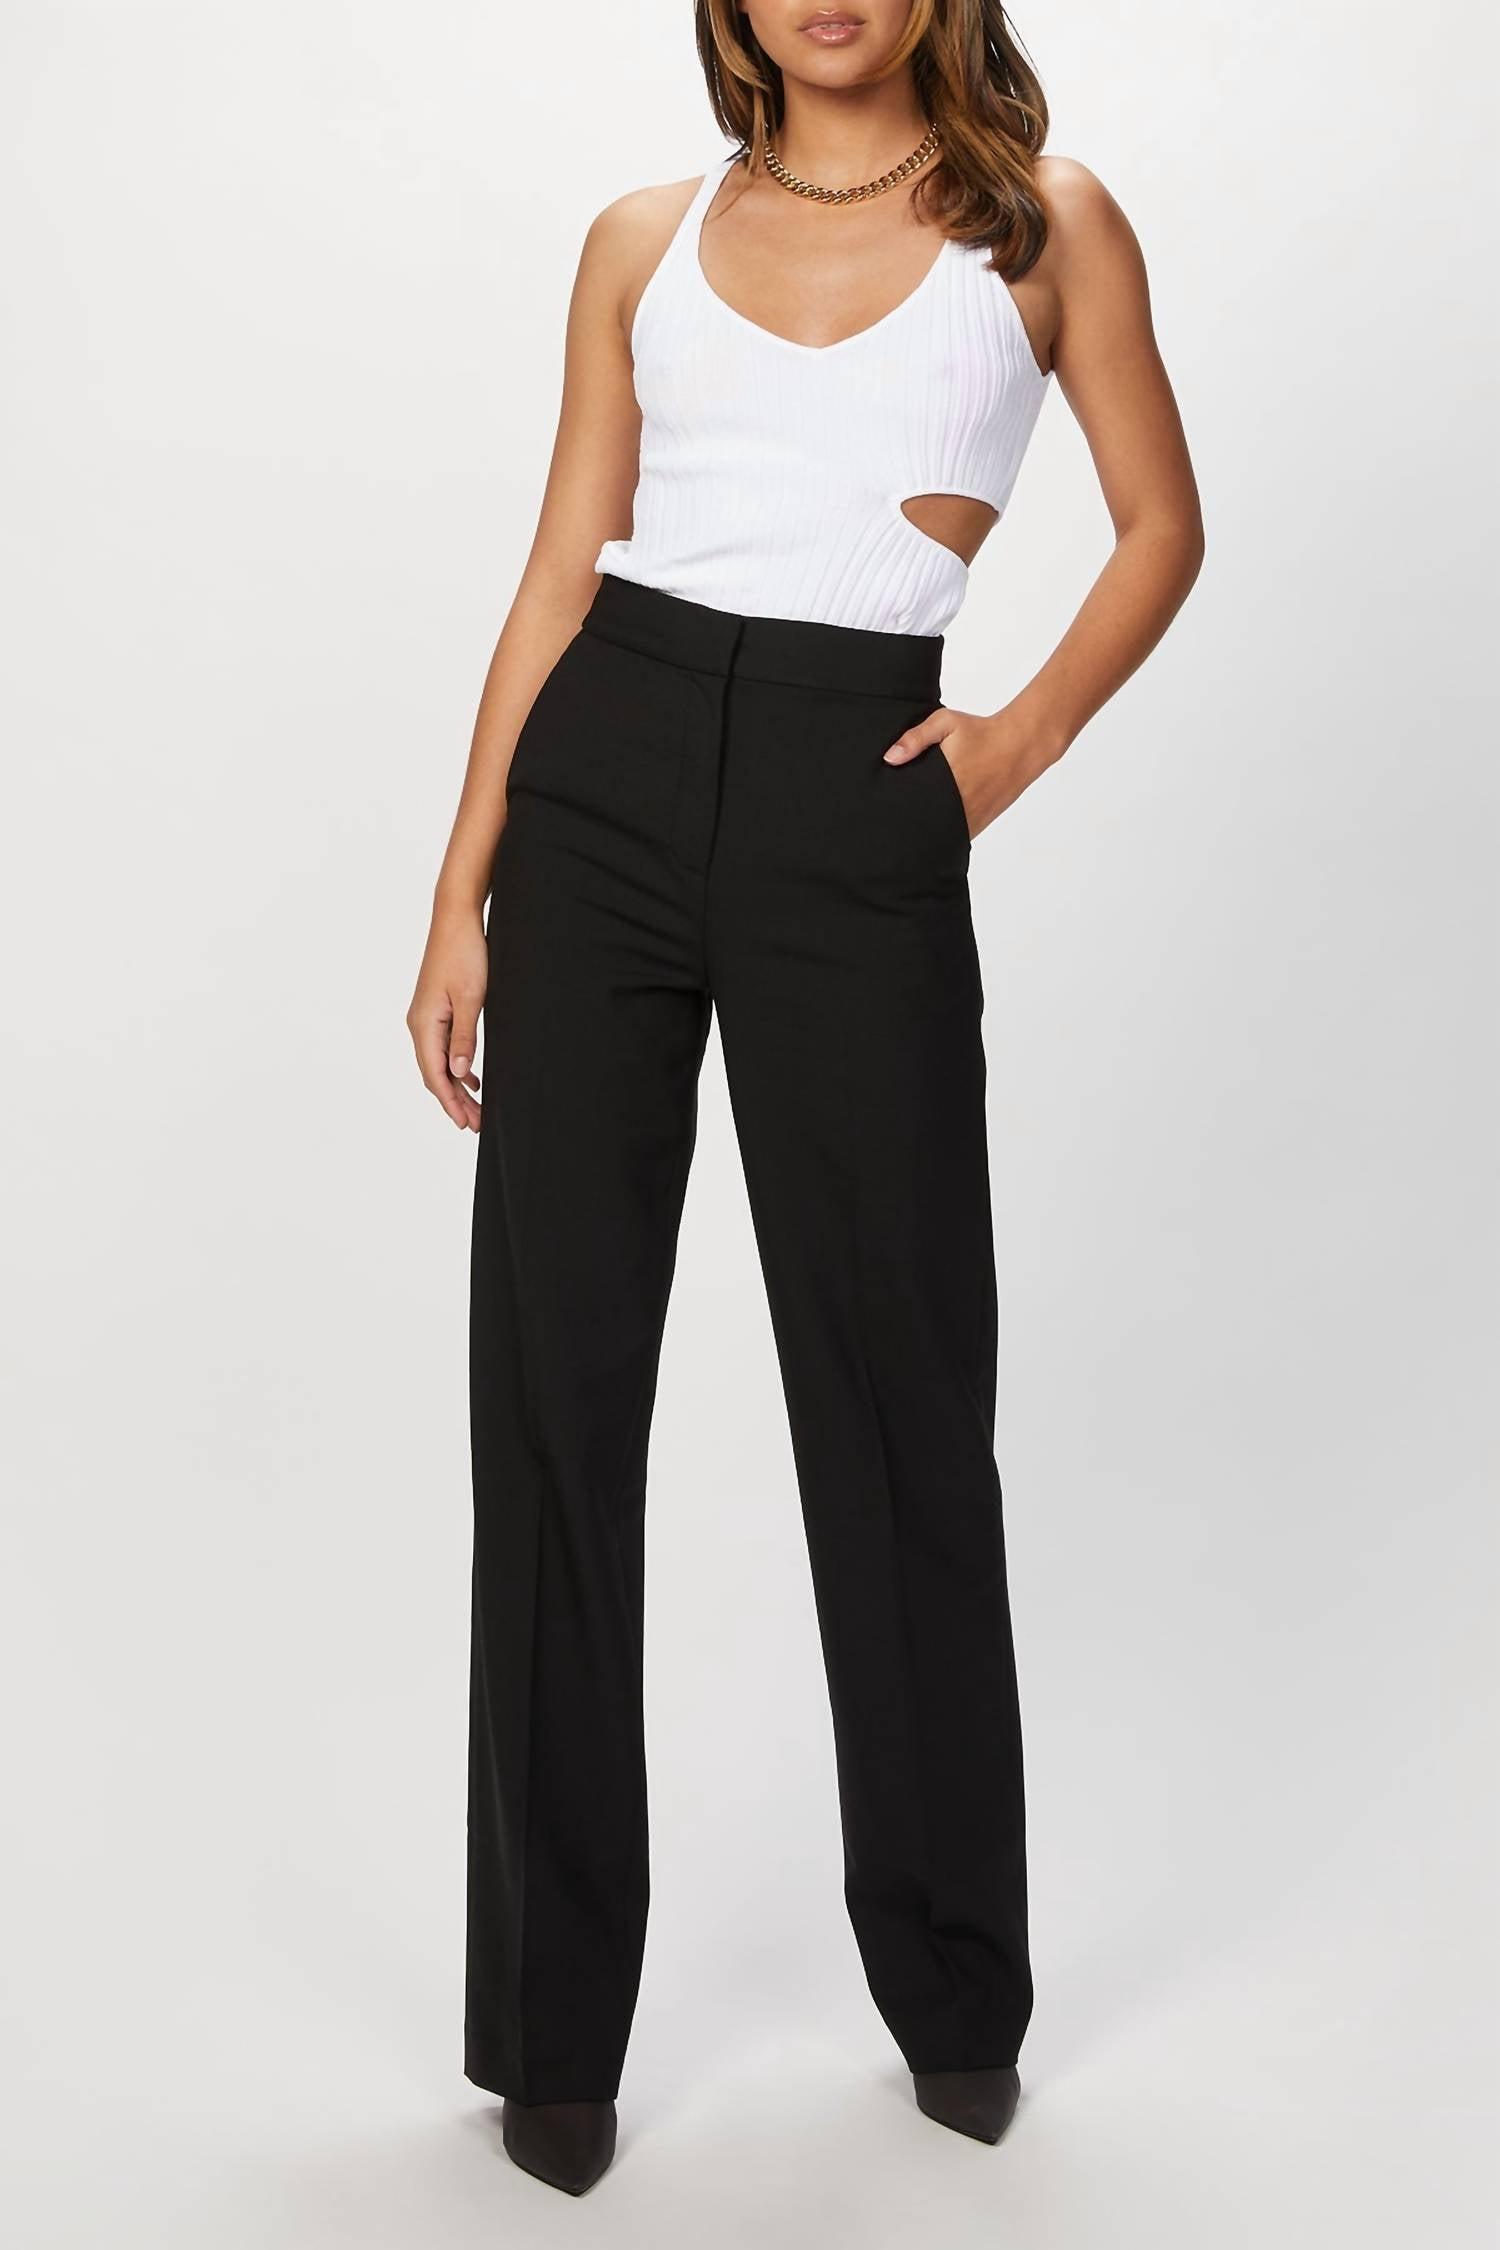 Rebecca Taylor Cavalry Twill Straight Pant in Black | Lyst